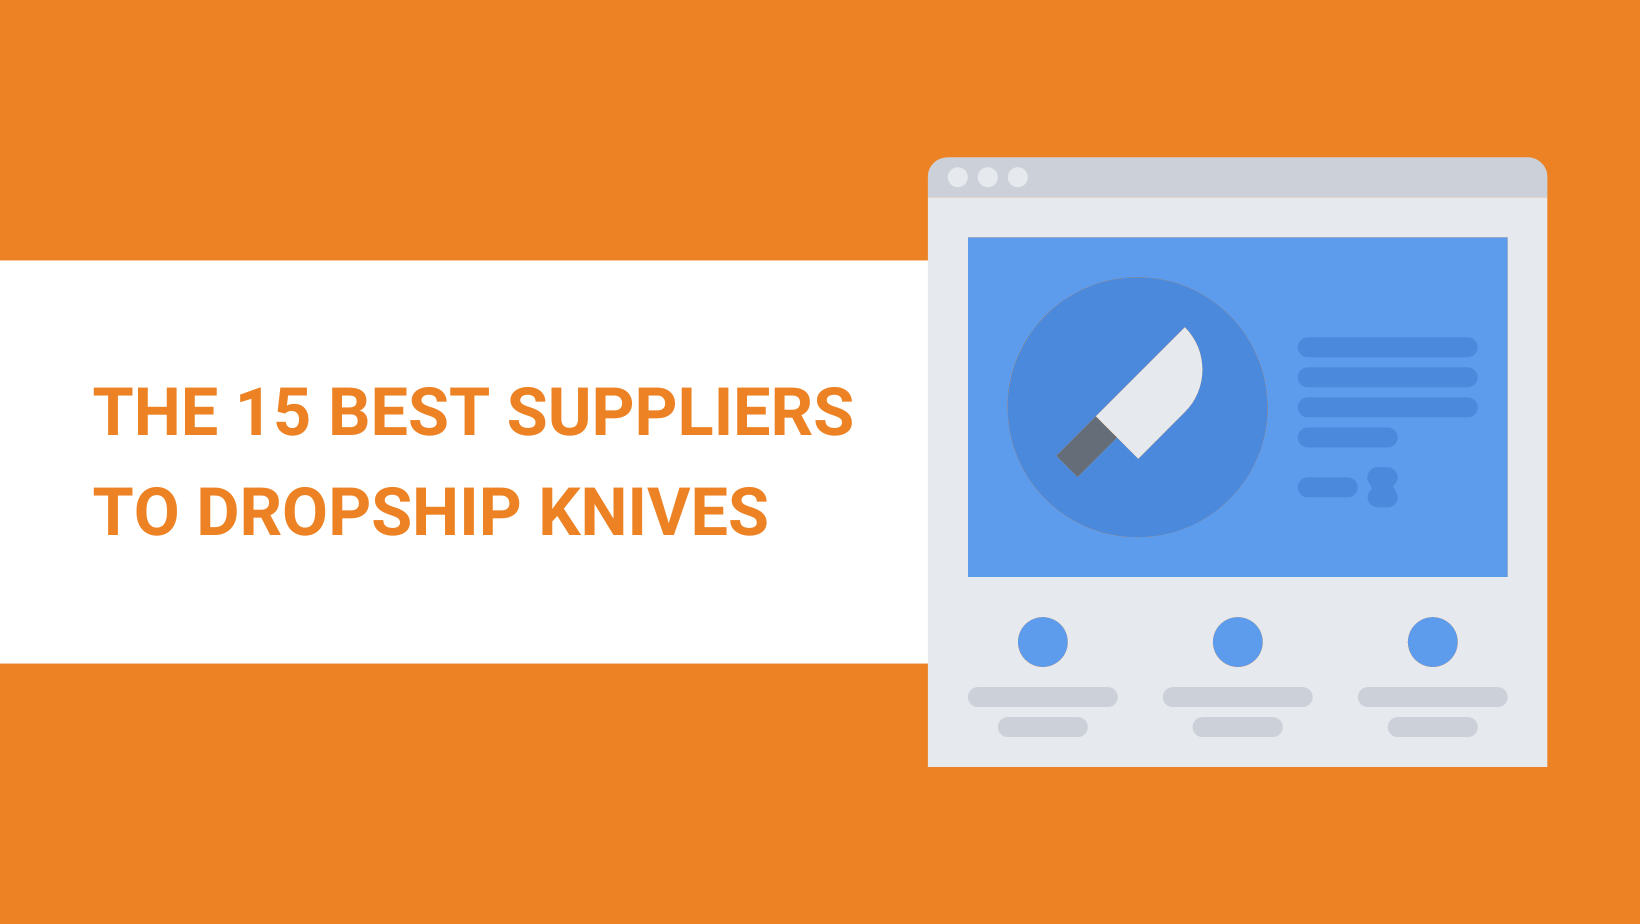 THE 15 BEST SUPPLIERS TO DROPSHIP KNIVES